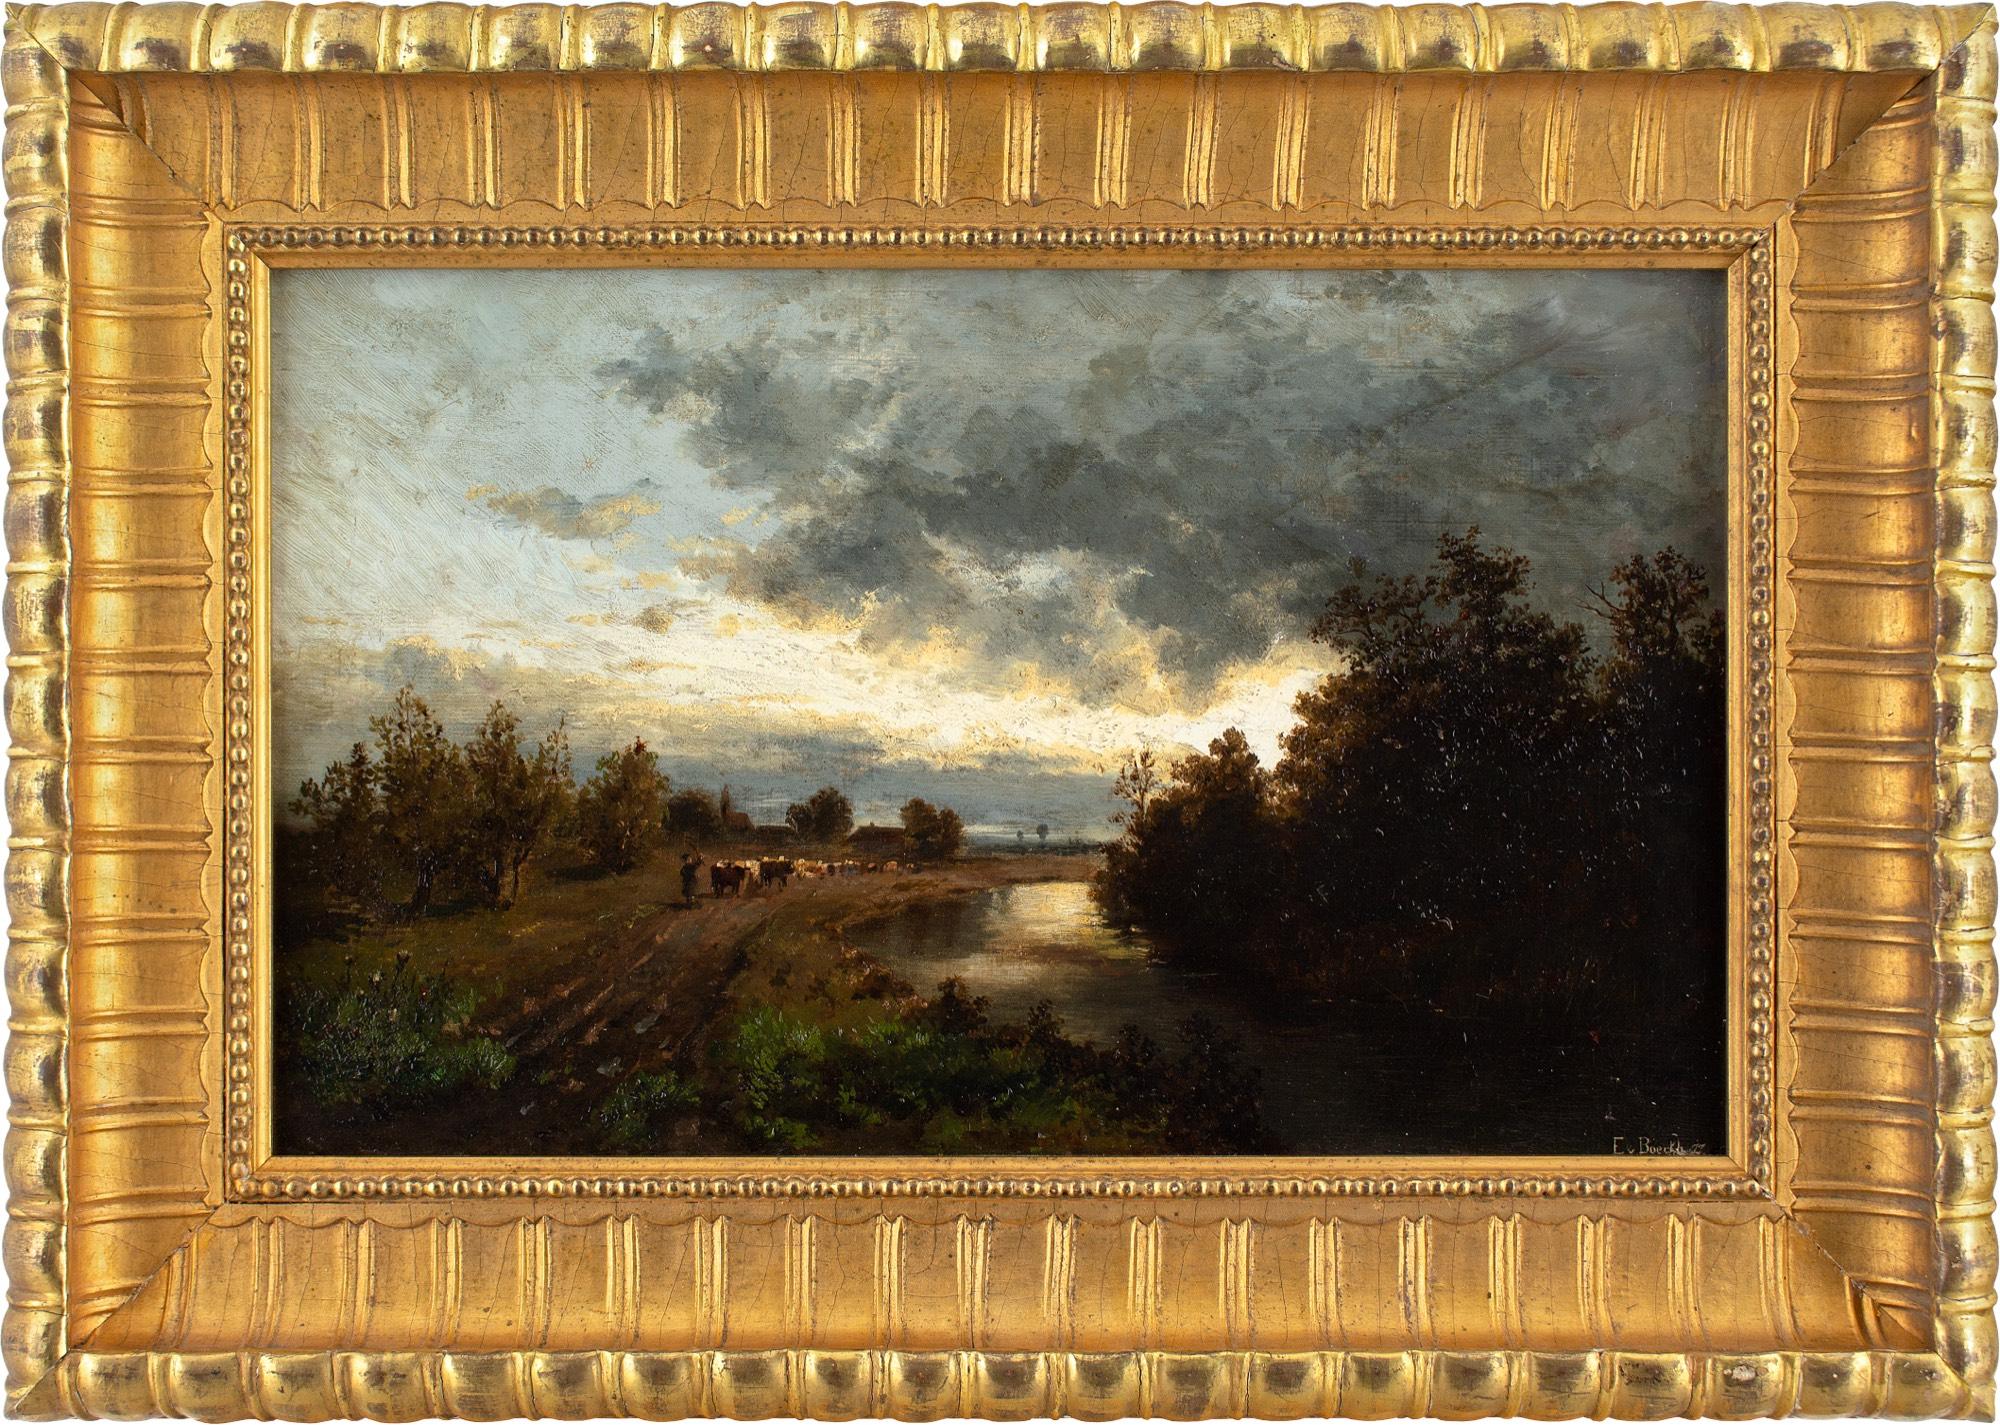 This late 19th-century oil painting by German artist Emma von Boeckh (fl.1877-1895) depicts a stormy landscape with a river, cattle and drover.

Dense clouds partially obscure a late sun, which flickers upon a winding river. Cattle amble through the